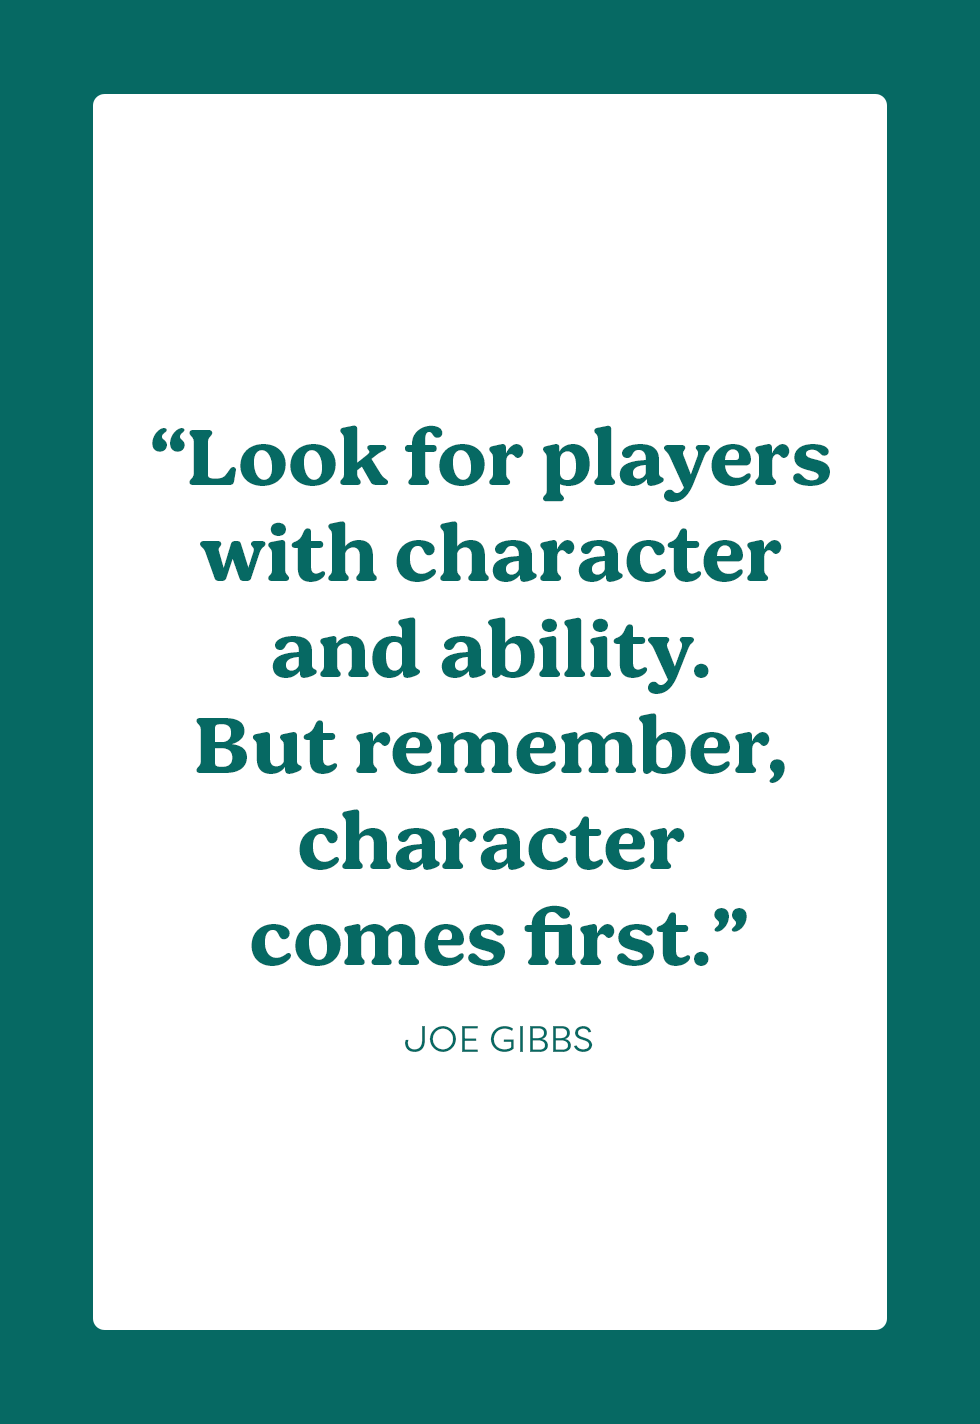 player quotes and sayings